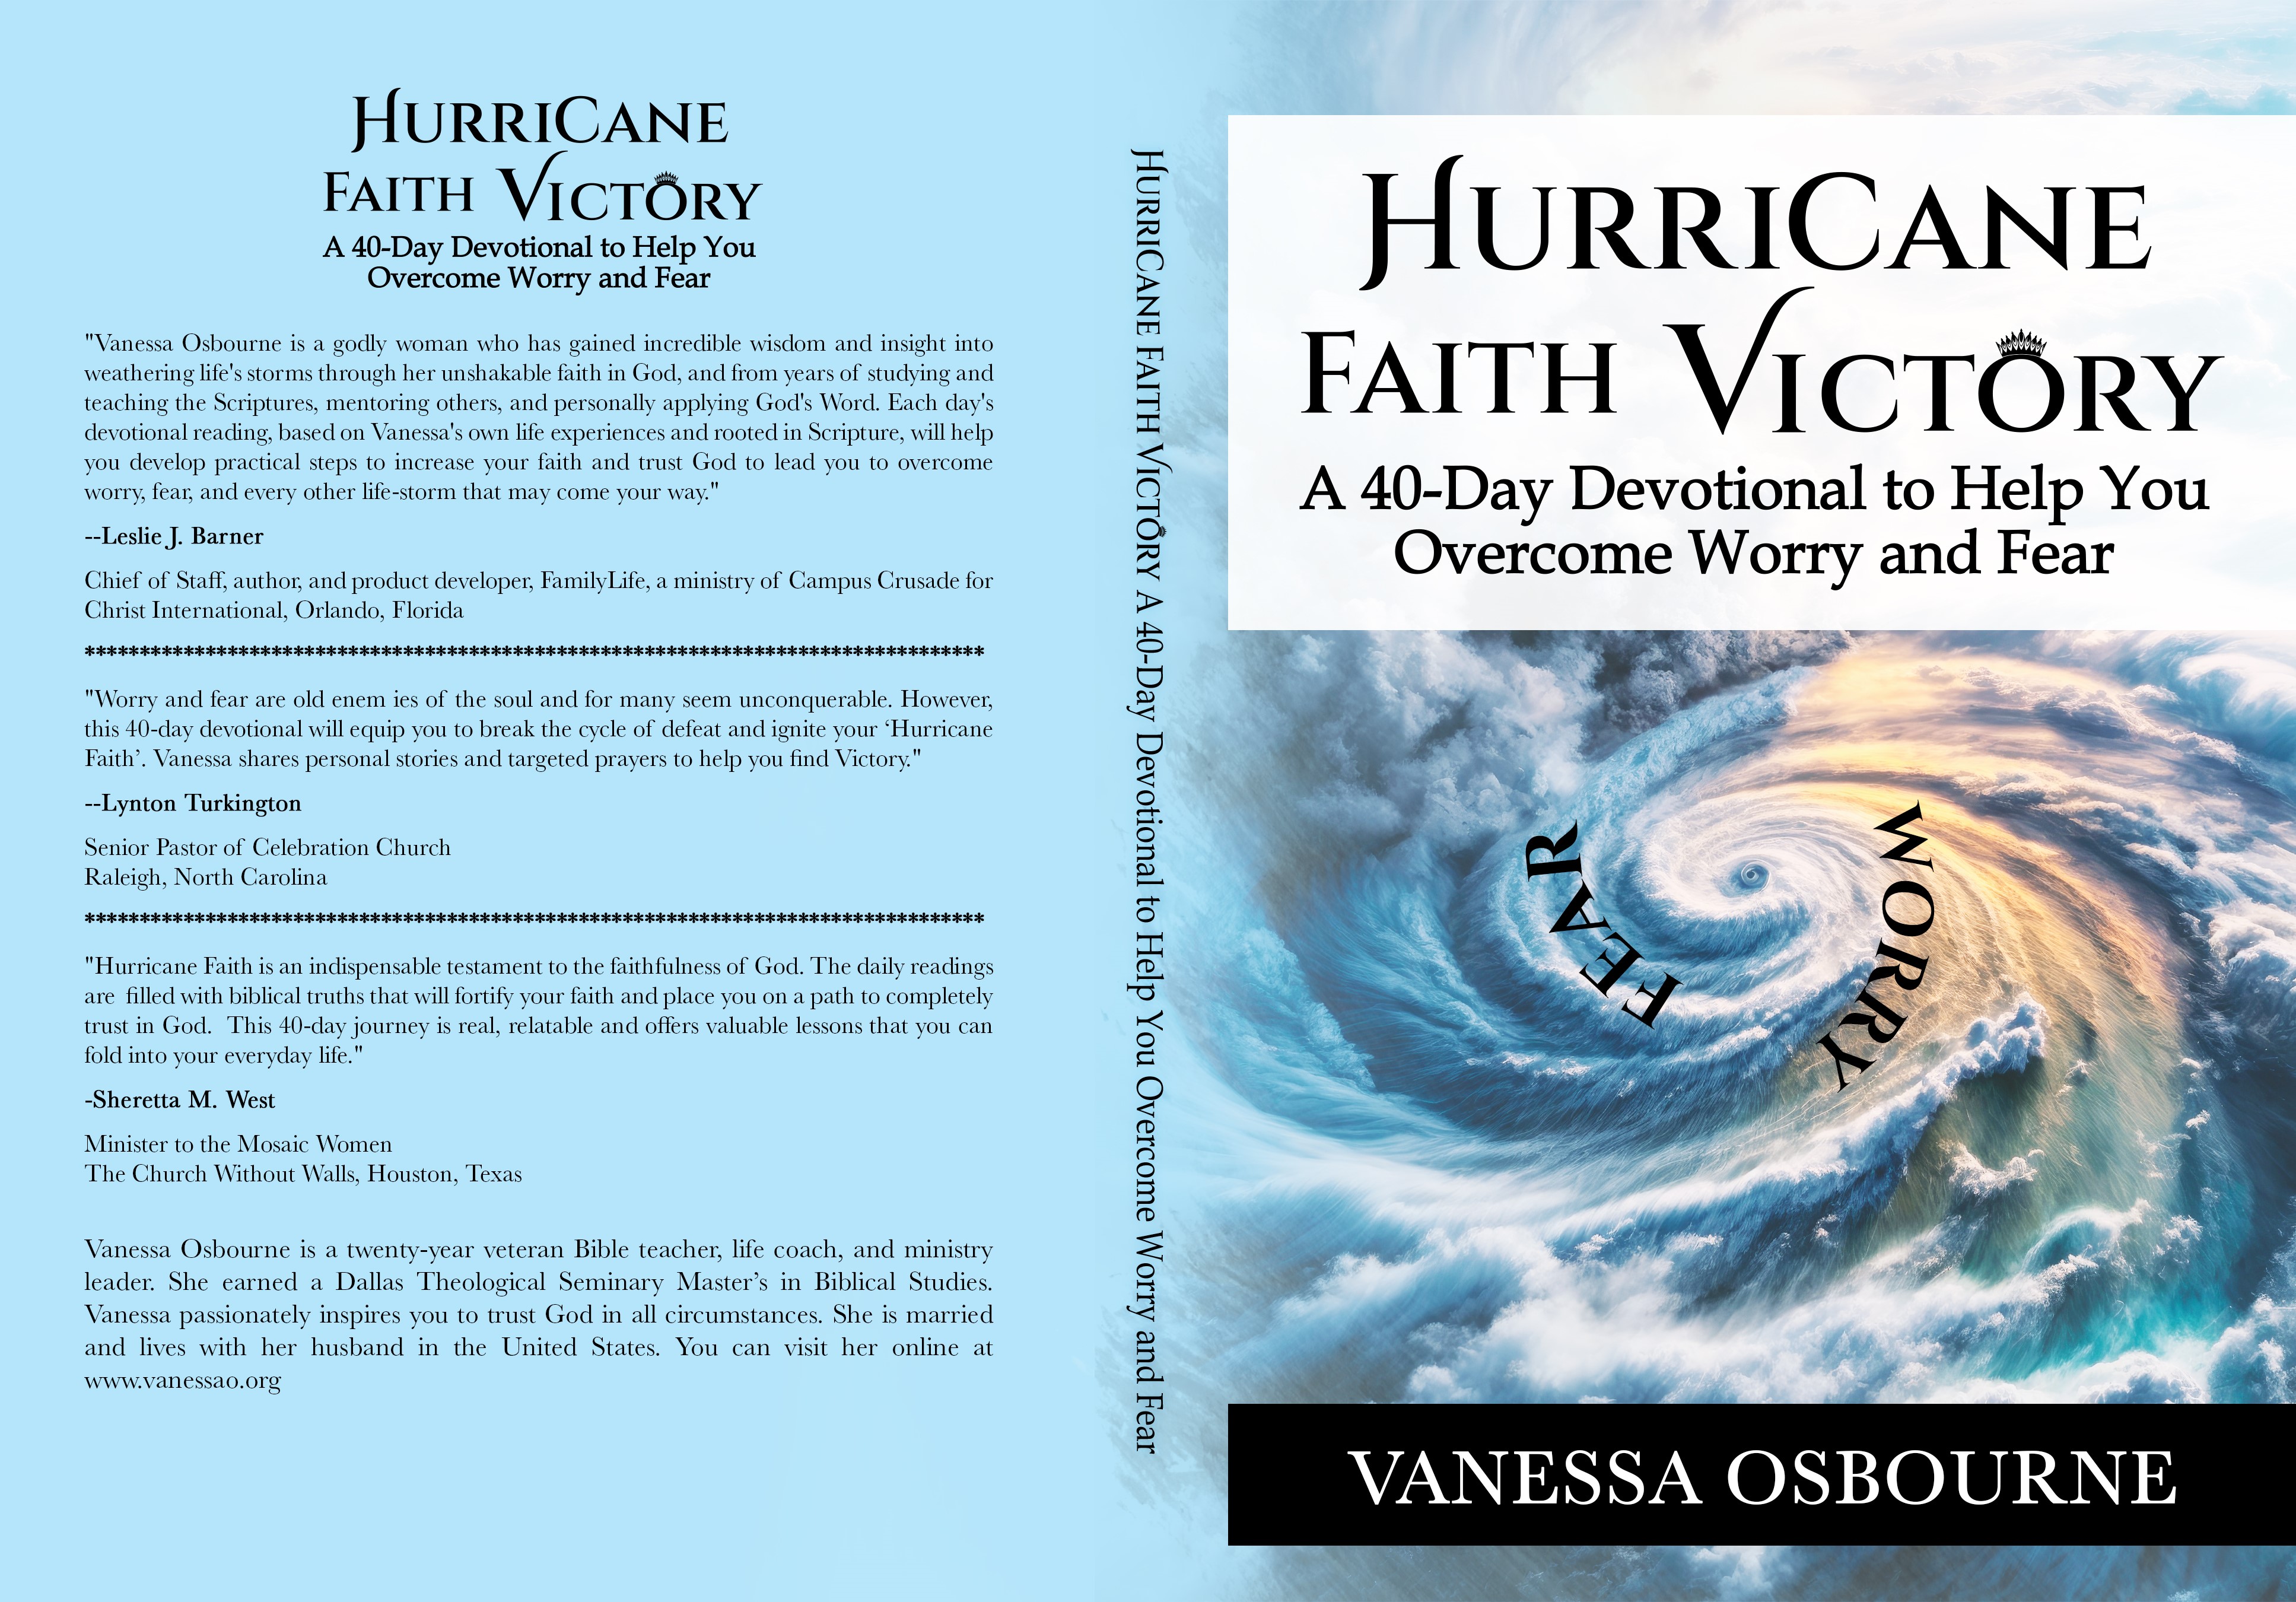 Unleash the Emotions into the Desire with Vanessa Osbourne's Spiritual Hallmark, "Hurricane Faith Victory: A 40-day Devotional to Help Overcome Worry and Fear"